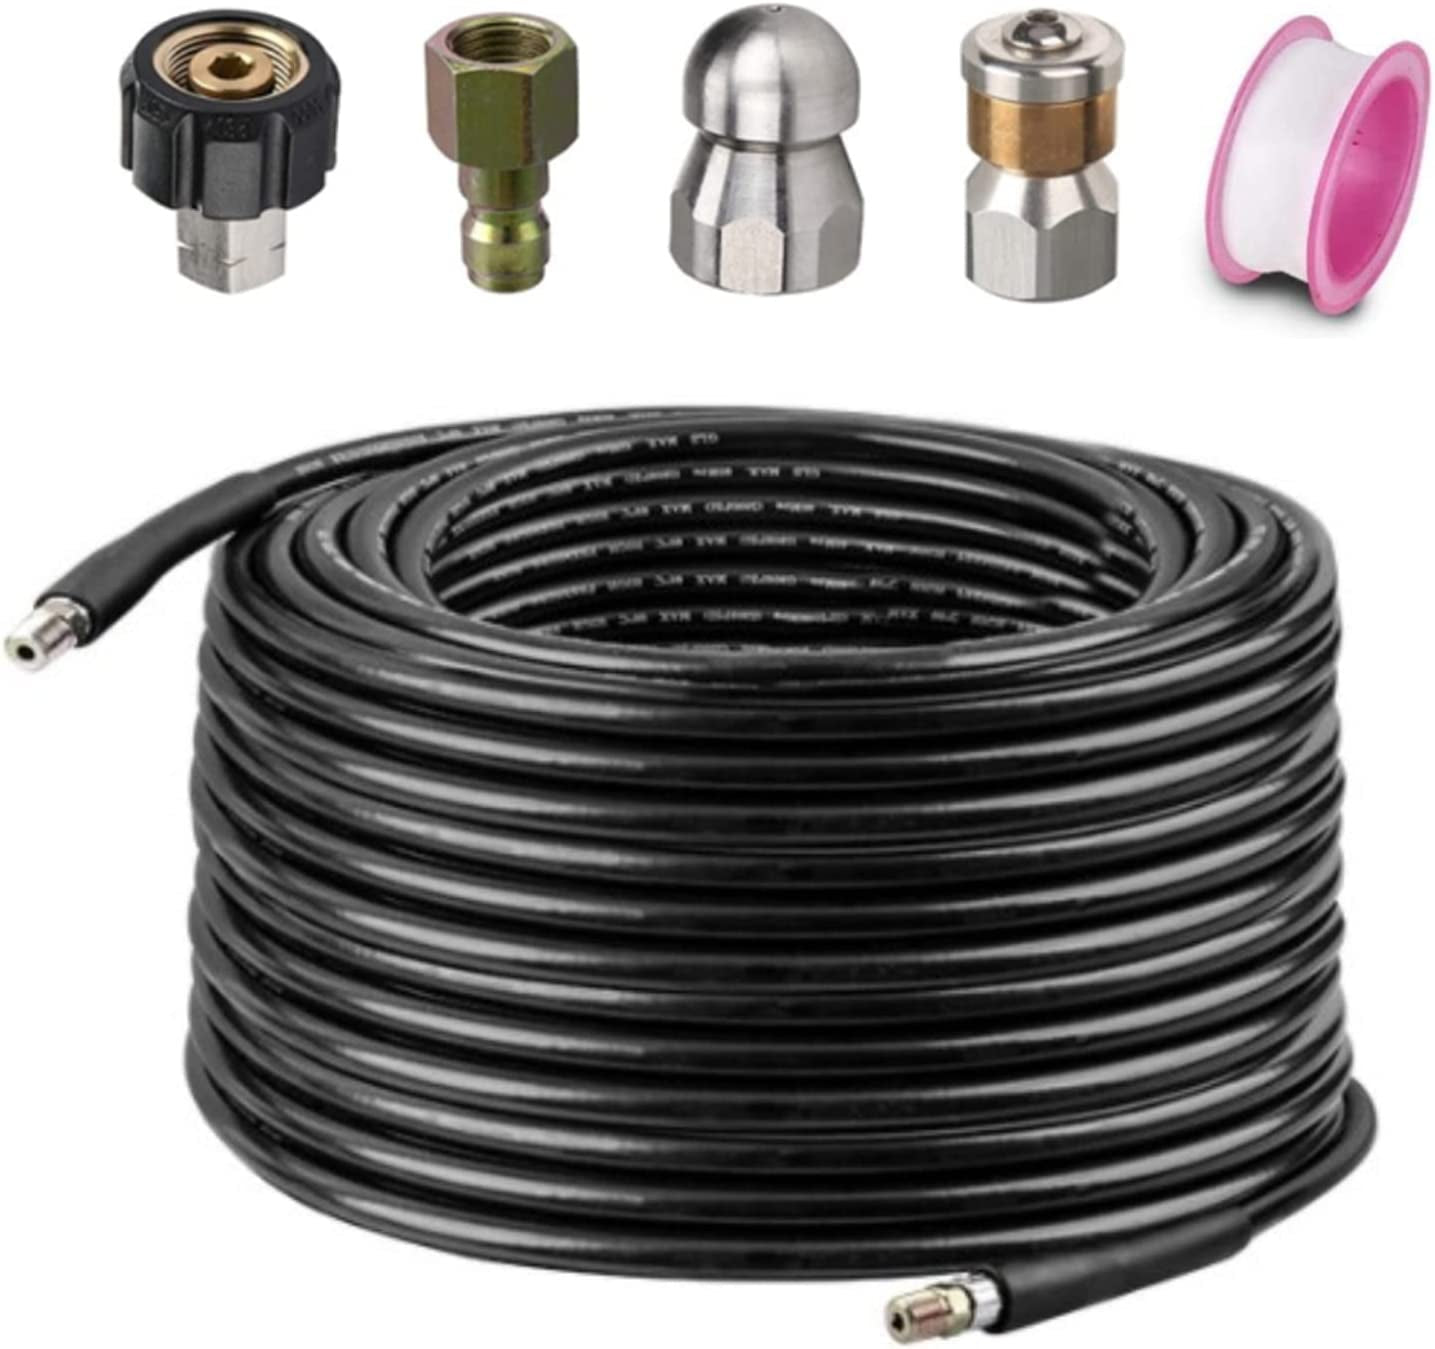 lehom, Lehom Sewer Kit for Pressure Washer High Pressure Hose Adaptor Extension 98 FT Hose 1/4 Inch NPT Button Nose and Rotating Sewer Jetting Nozzle